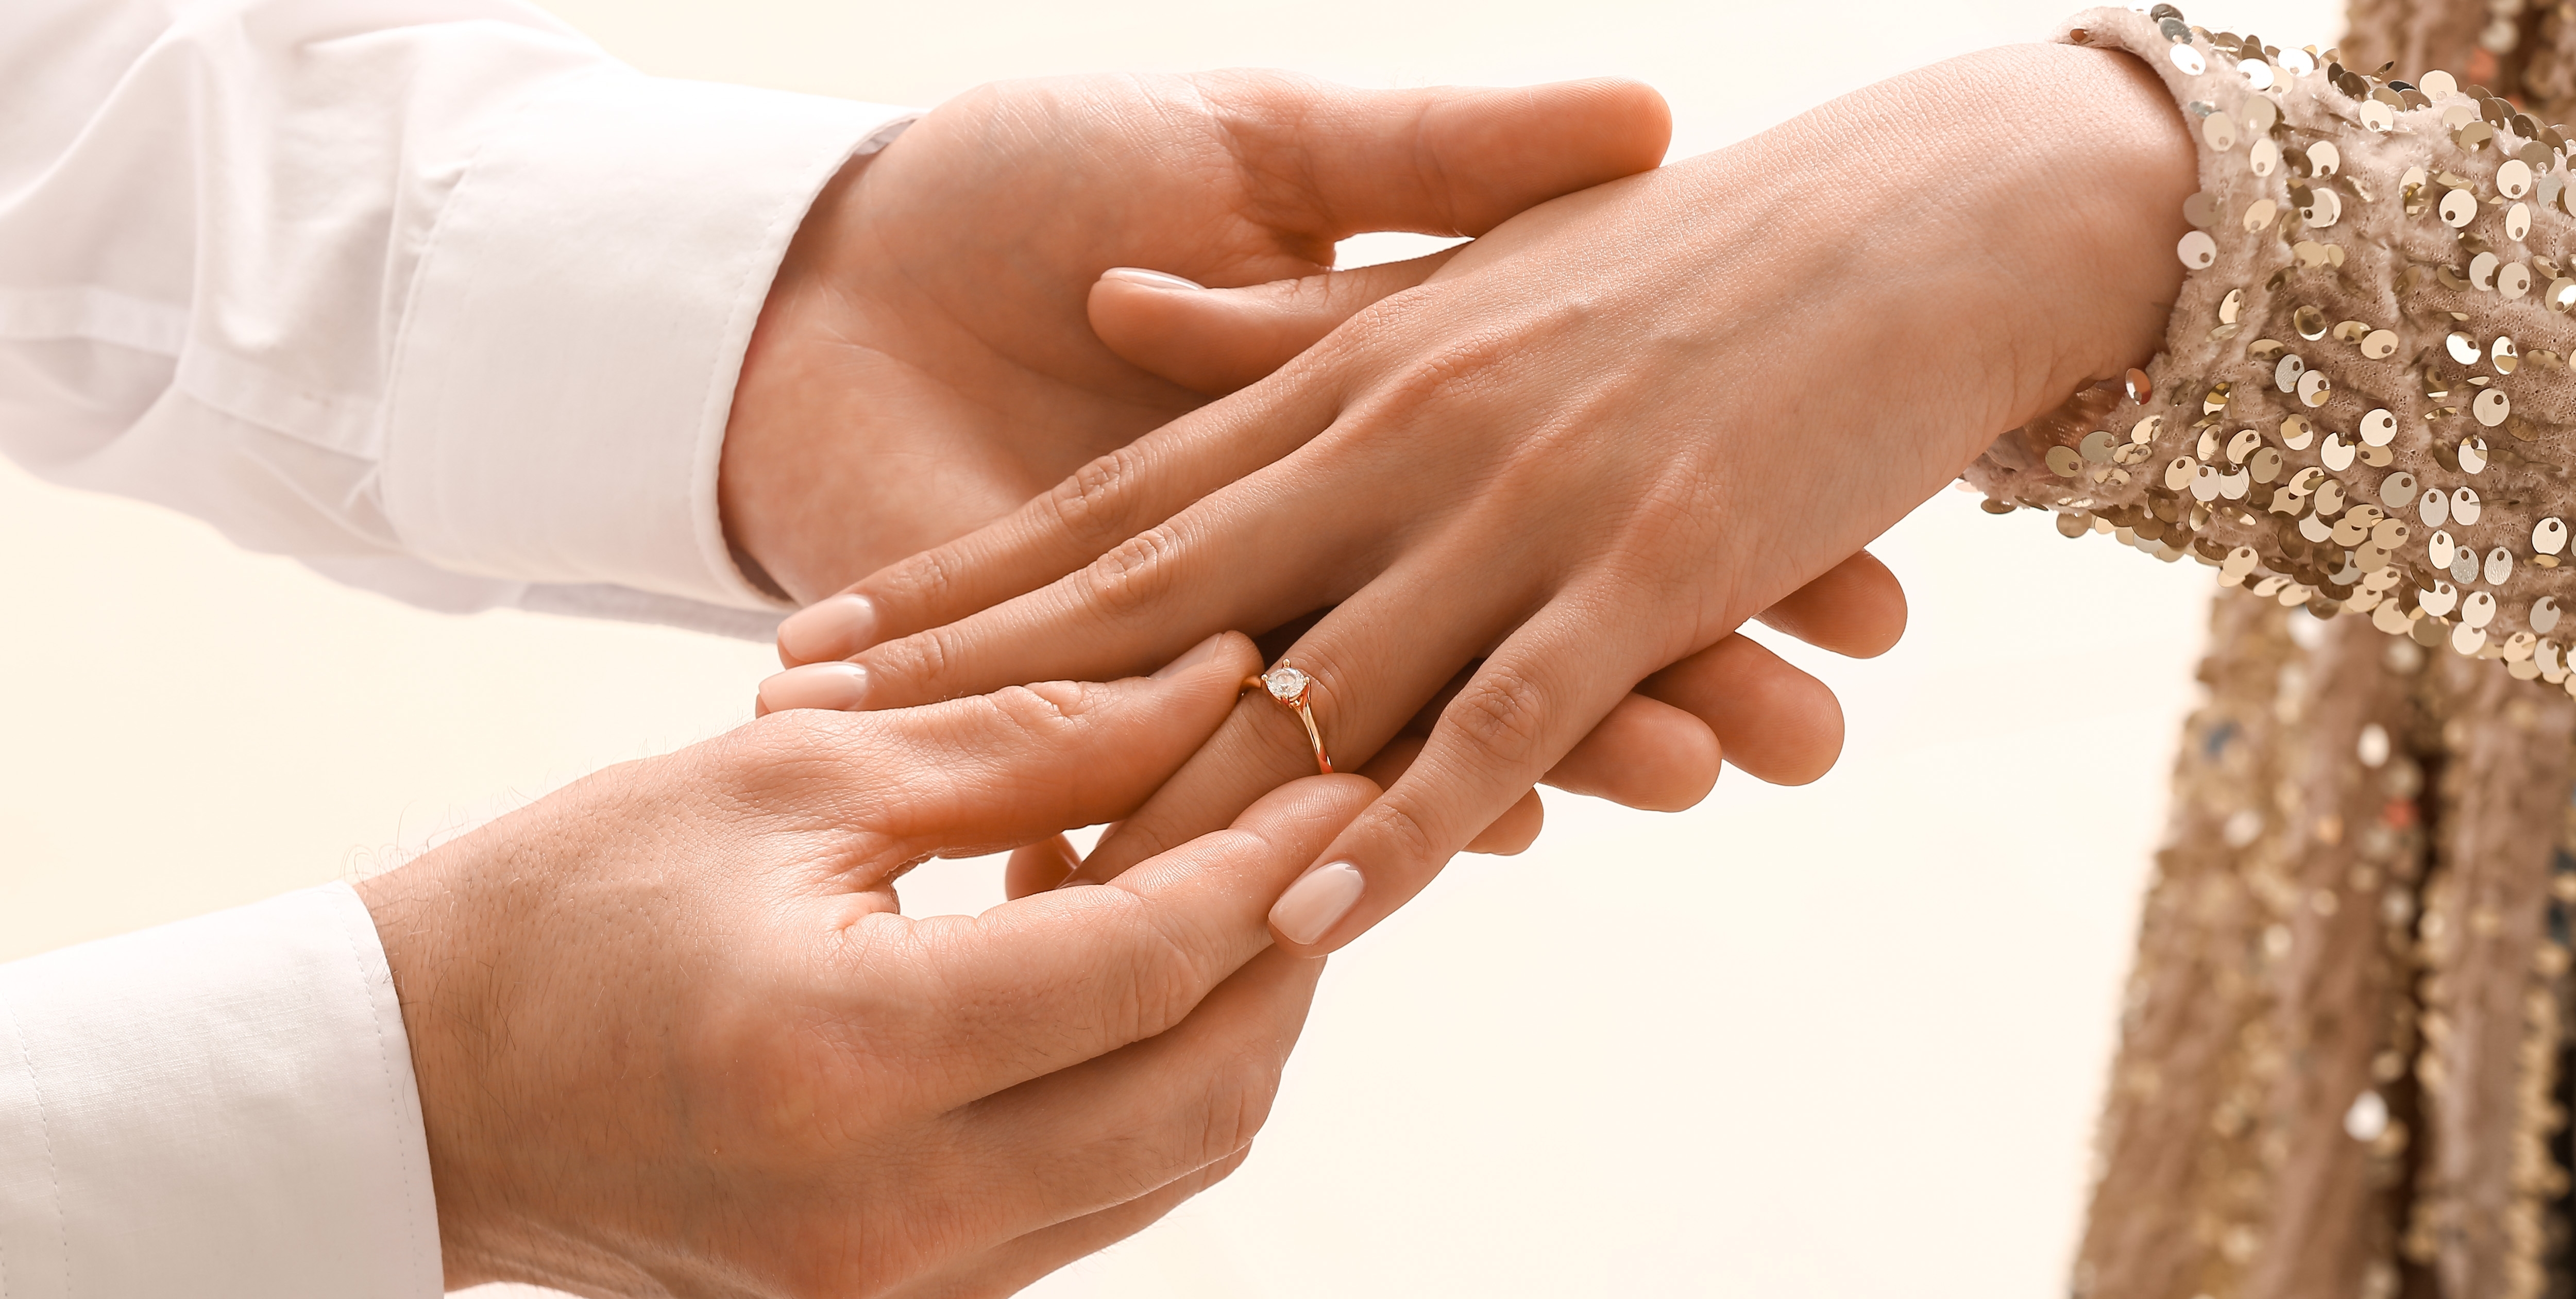 A man placing an engagement ring on a woman's hand | Source: Shutterstock